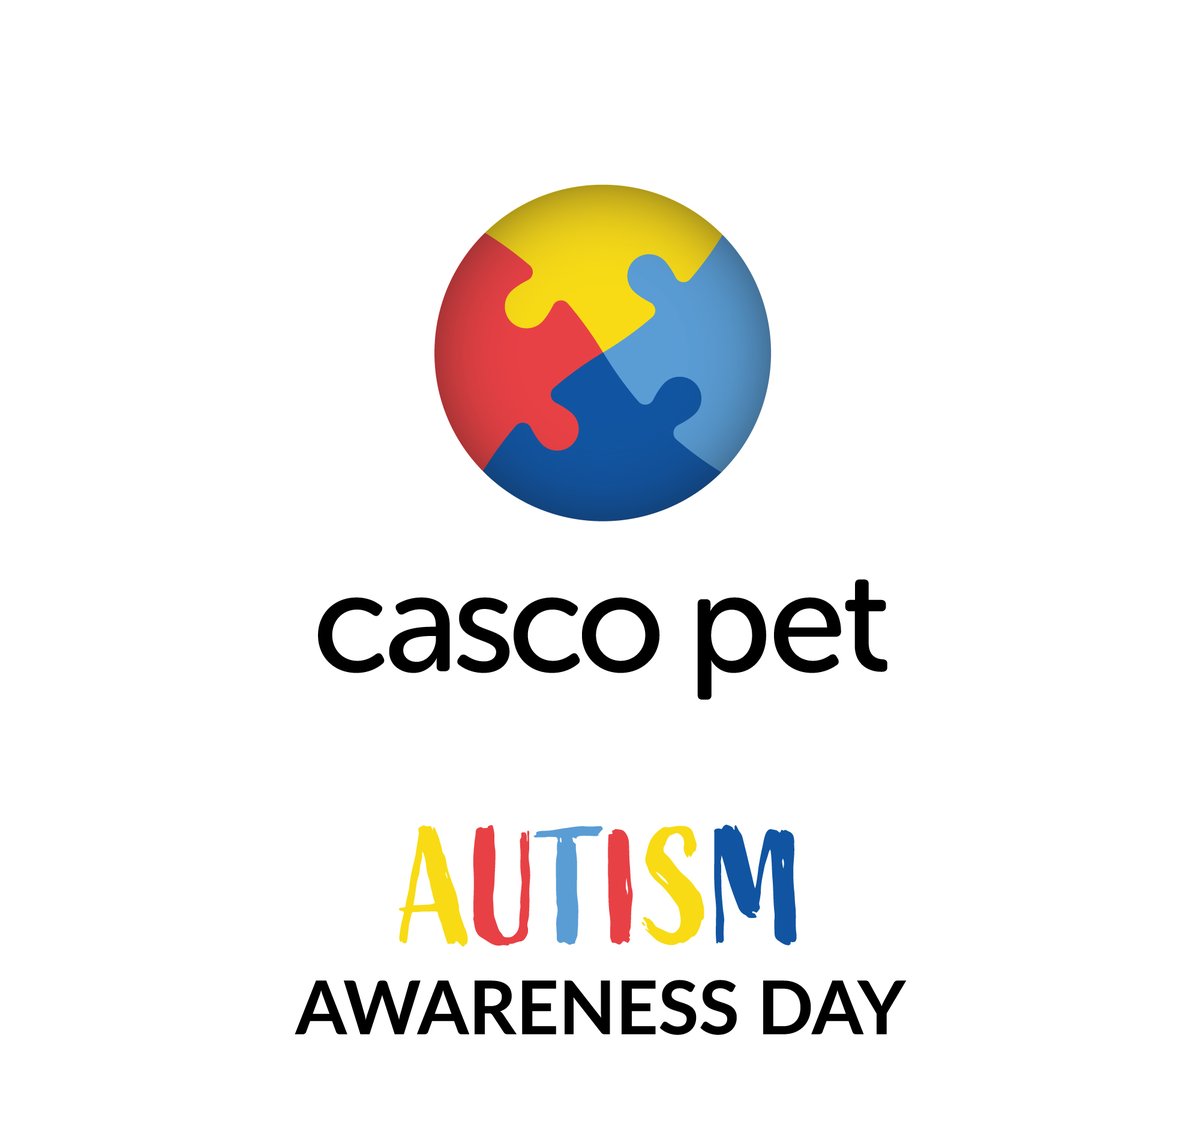 🧩 Celebrating World Autism Awareness Day! April 2nd marks a day of understanding, acceptance, and inclusion for individuals on the autism spectrum. Today, we honor the unique talents and perspectives of individuals with autism and their contributions to our communities.